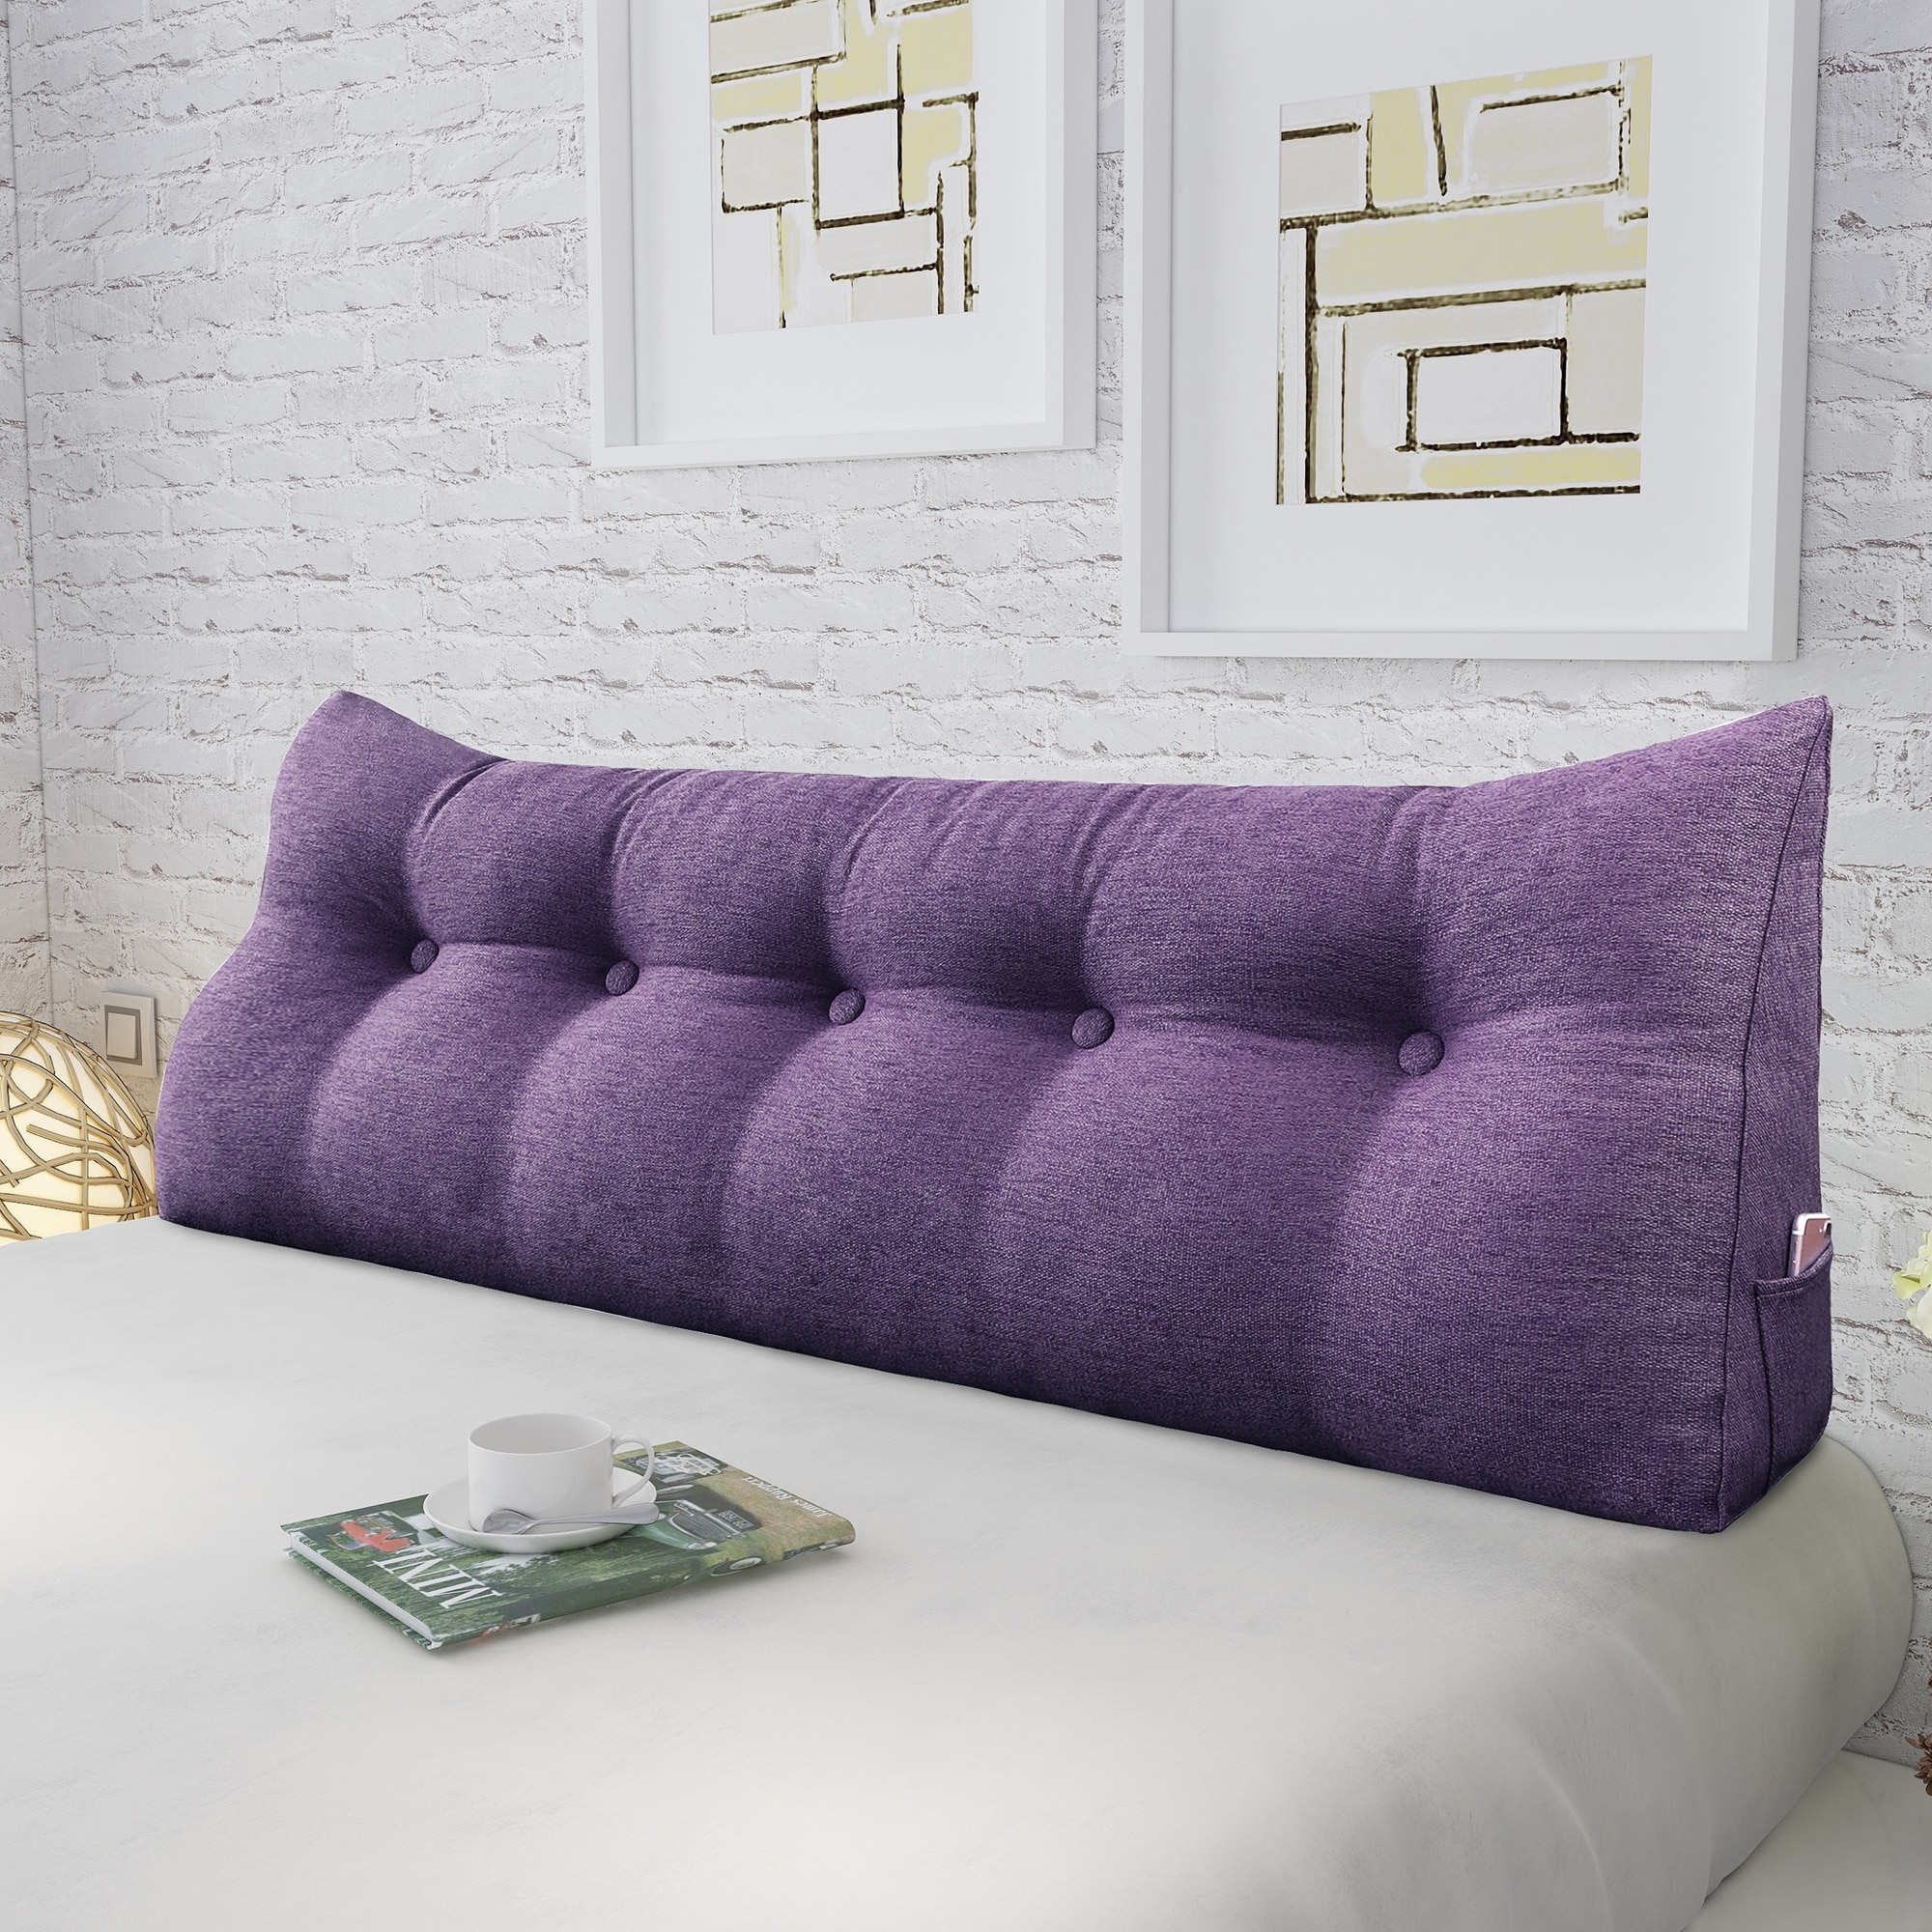 https://ak1.ostkcdn.com/images/products/is/images/direct/93b9f5d4872ca1b2b4d53028ba4ecdf8ec207a45/WOWMAX-Large-Bed-Headboard-Pillow-Back-Support-Reading-Wedge-Cushion.jpg